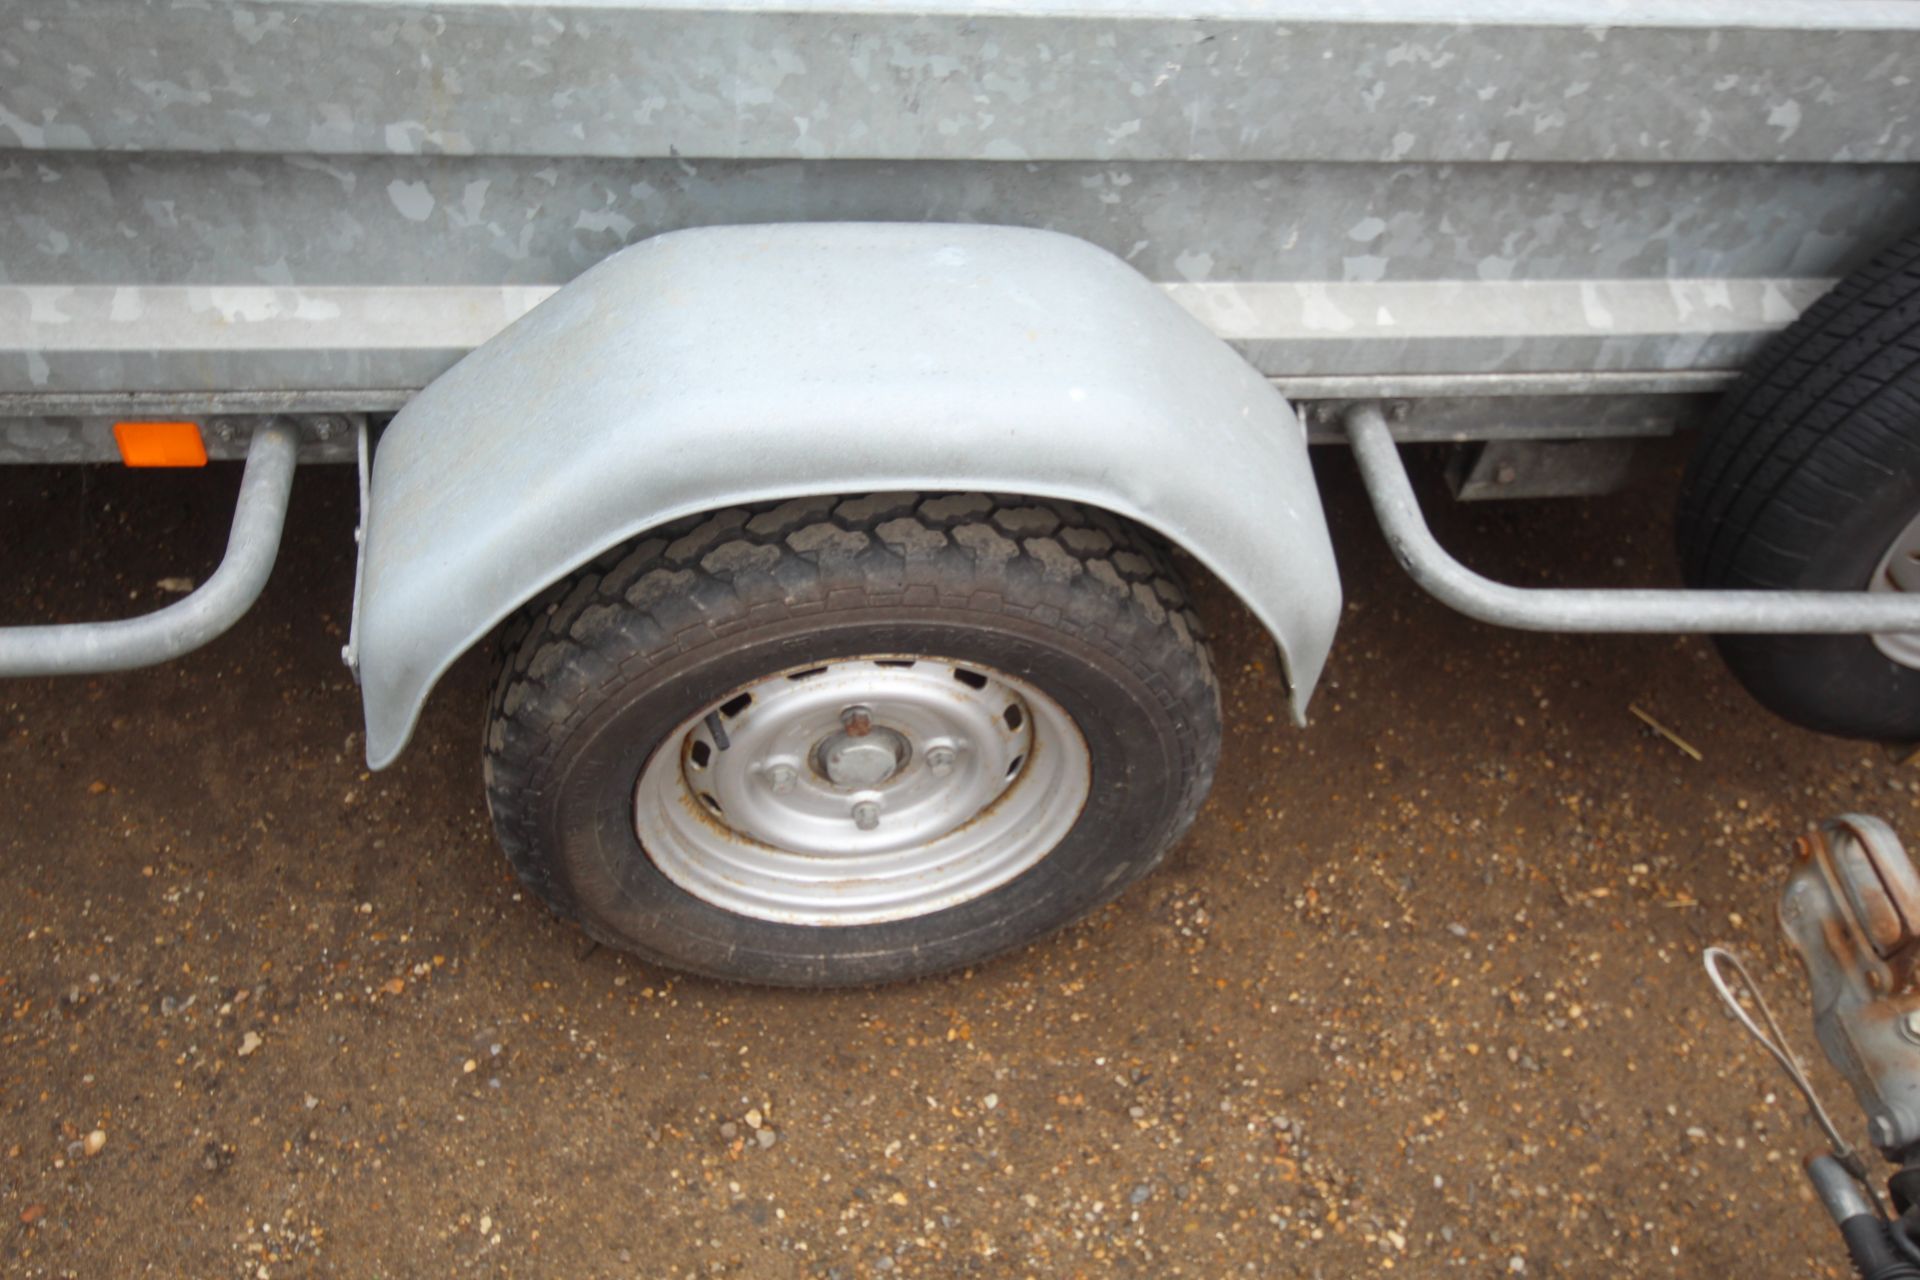 Lider 1T 10ft x 5ft 6in single axle tilt bed trailer. With brakes, bolt on sides, recent new tyres - Image 23 of 30